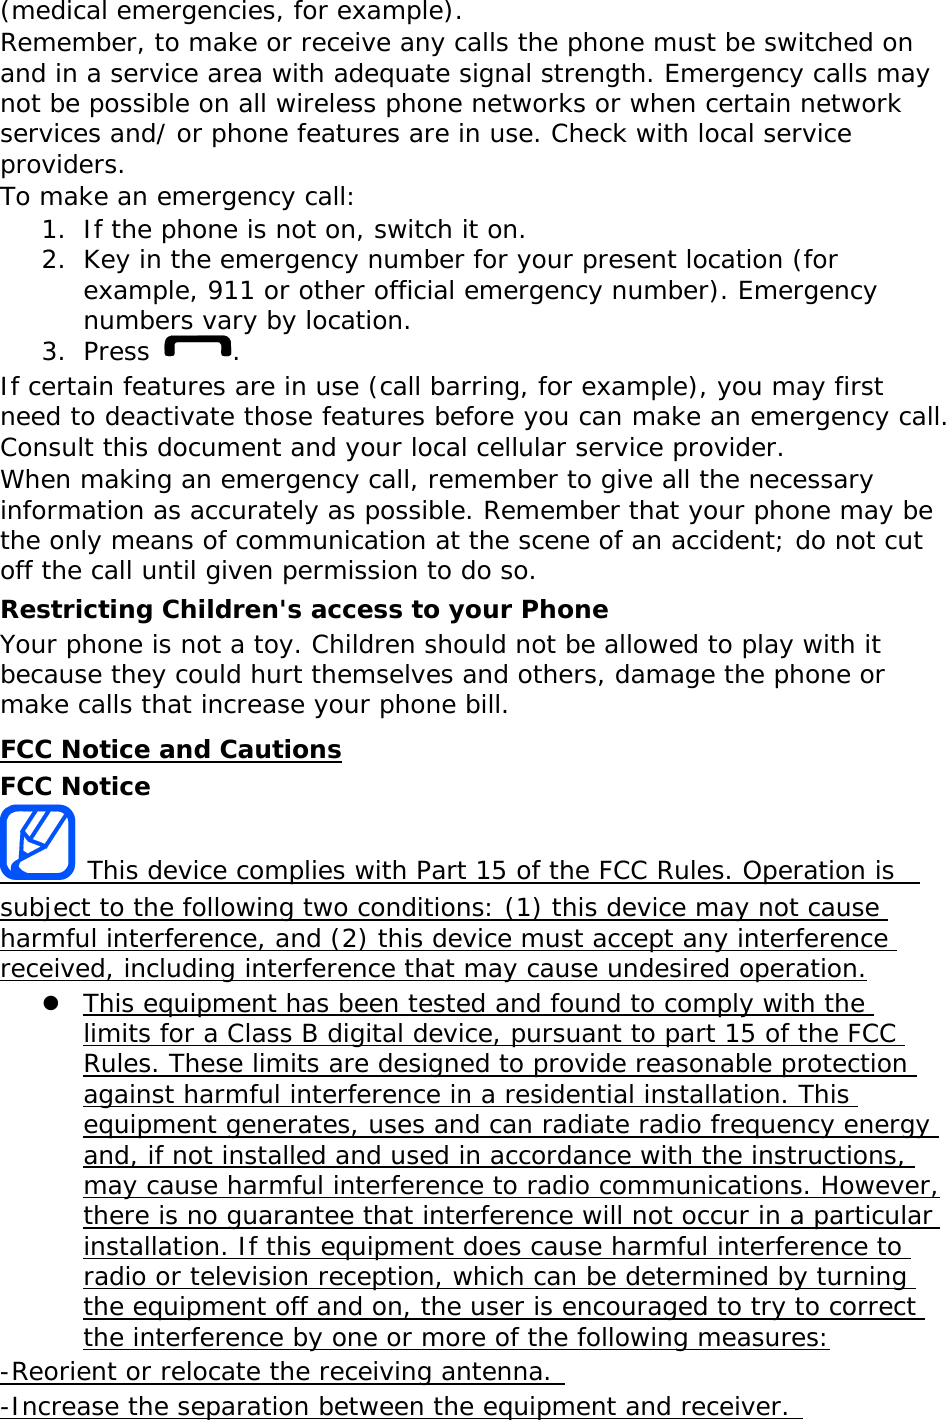 (medical emergencies, for example). Remember, to make or receive any calls the phone must be switched on and in a service area with adequate signal strength. Emergency calls may not be possible on all wireless phone networks or when certain network services and/ or phone features are in use. Check with local service providers. To make an emergency call: 1. If the phone is not on, switch it on. 2. Key in the emergency number for your present location (for example, 911 or other official emergency number). Emergency numbers vary by location. 3. Press  . If certain features are in use (call barring, for example), you may first need to deactivate those features before you can make an emergency call. Consult this document and your local cellular service provider. When making an emergency call, remember to give all the necessary information as accurately as possible. Remember that your phone may be the only means of communication at the scene of an accident; do not cut off the call until given permission to do so. Restricting Children&apos;s access to your Phone Your phone is not a toy. Children should not be allowed to play with it because they could hurt themselves and others, damage the phone or make calls that increase your phone bill. FCC Notice and Cautions FCC Notice  This device complies with Part 15 of the FCC Rules. Operation is  subject to the following two conditions: (1) this device may not cause harmful interference, and (2) this device must accept any interference received, including interference that may cause undesired operation. z This equipment has been tested and found to comply with the limits for a Class B digital device, pursuant to part 15 of the FCC Rules. These limits are designed to provide reasonable protection against harmful interference in a residential installation. This equipment generates, uses and can radiate radio frequency energy and, if not installed and used in accordance with the instructions, may cause harmful interference to radio communications. However, there is no guarantee that interference will not occur in a particular installation. If this equipment does cause harmful interference to radio or television reception, which can be determined by turning the equipment off and on, the user is encouraged to try to correct the interference by one or more of the following measures: -Reorient or relocate the receiving antenna.  -Increase the separation between the equipment and receiver.  